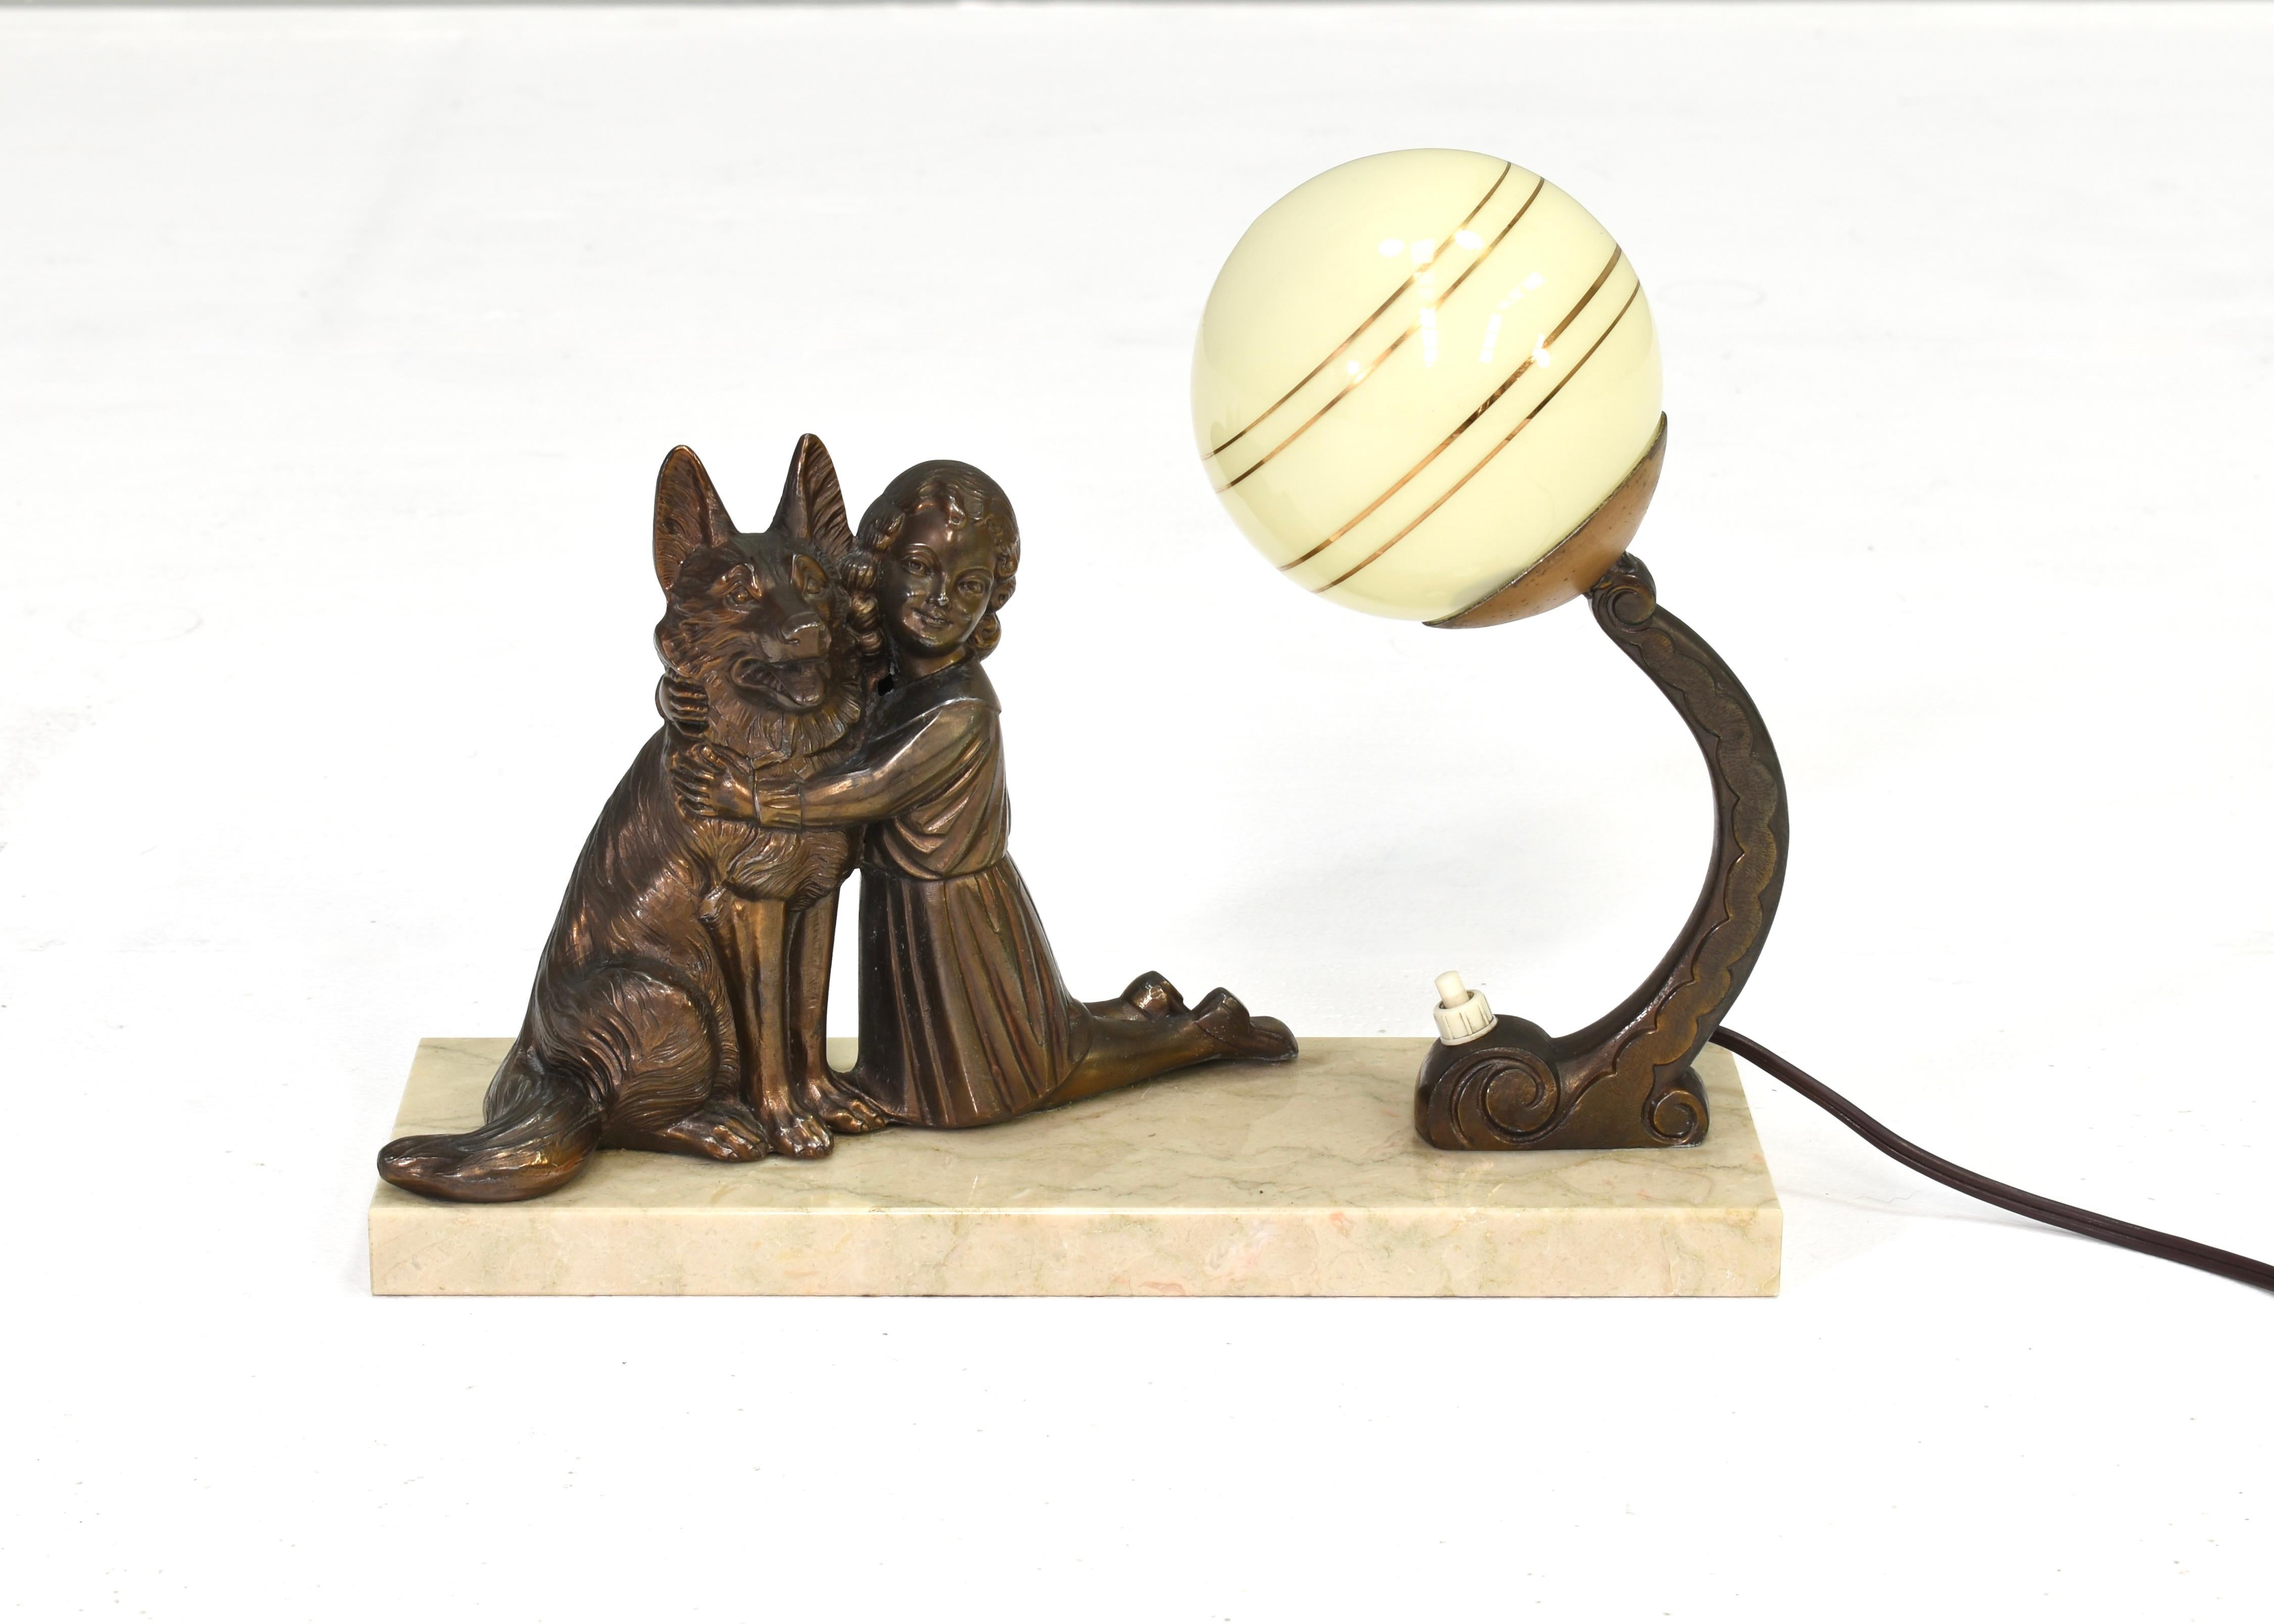 French Art Deco table lamp, 1930s. Spelter German shepherd and little girl sculpture on its marble base. Off white double glass shade with golden concentric circles.